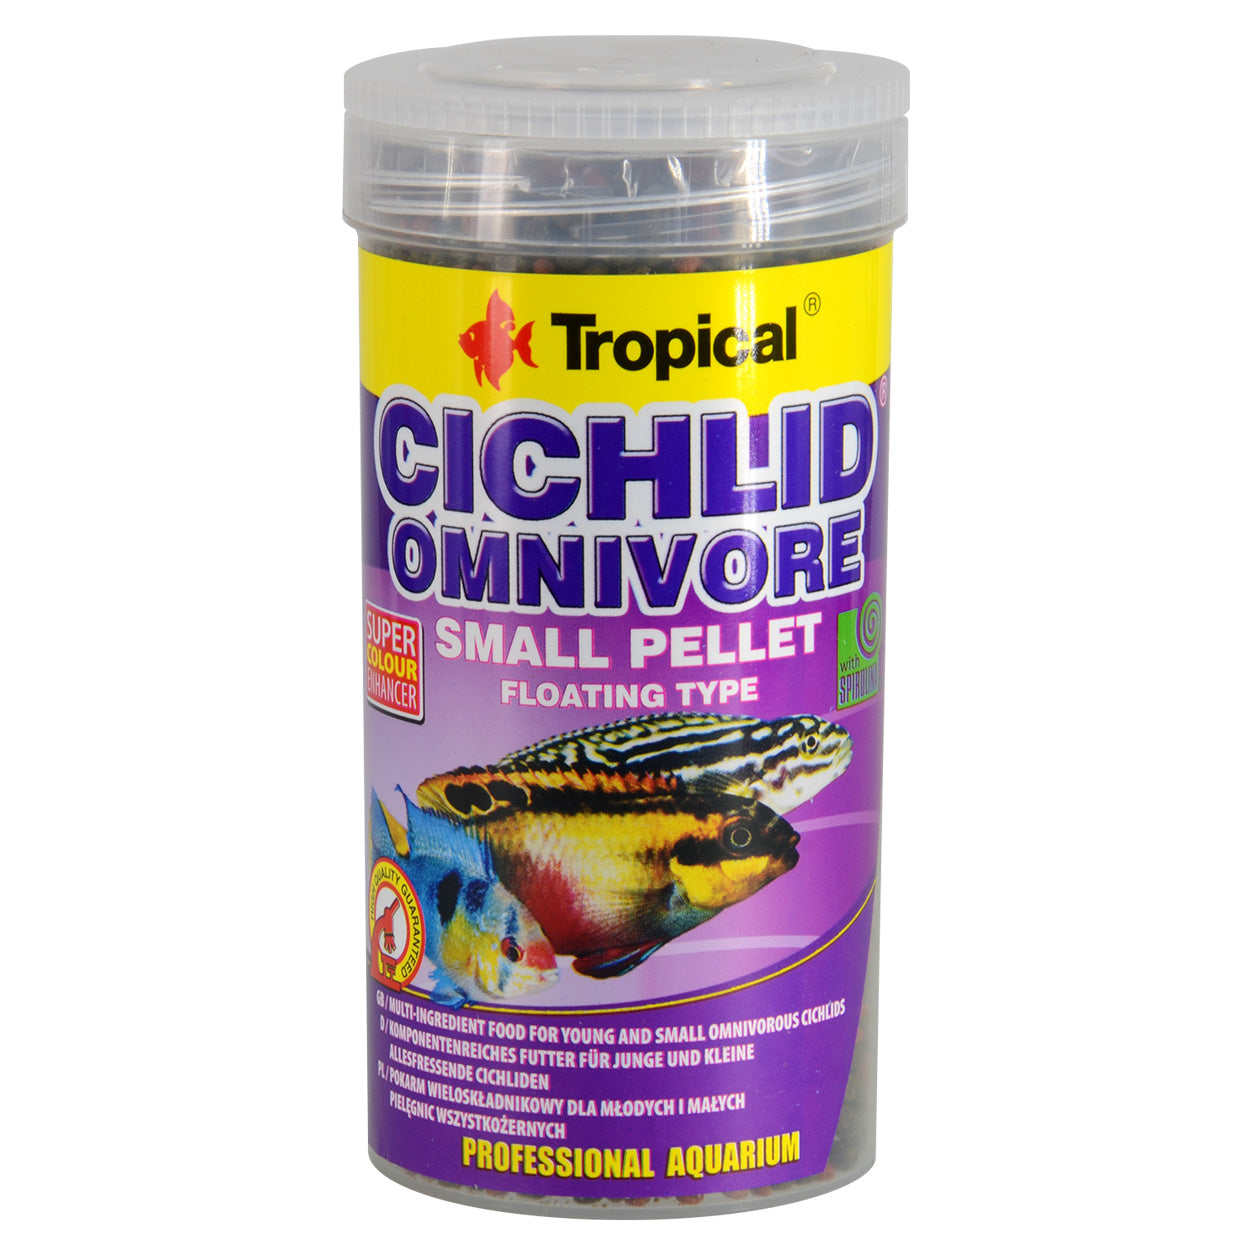 Tropical Cichlid Omnivore Small Pellet - Floating